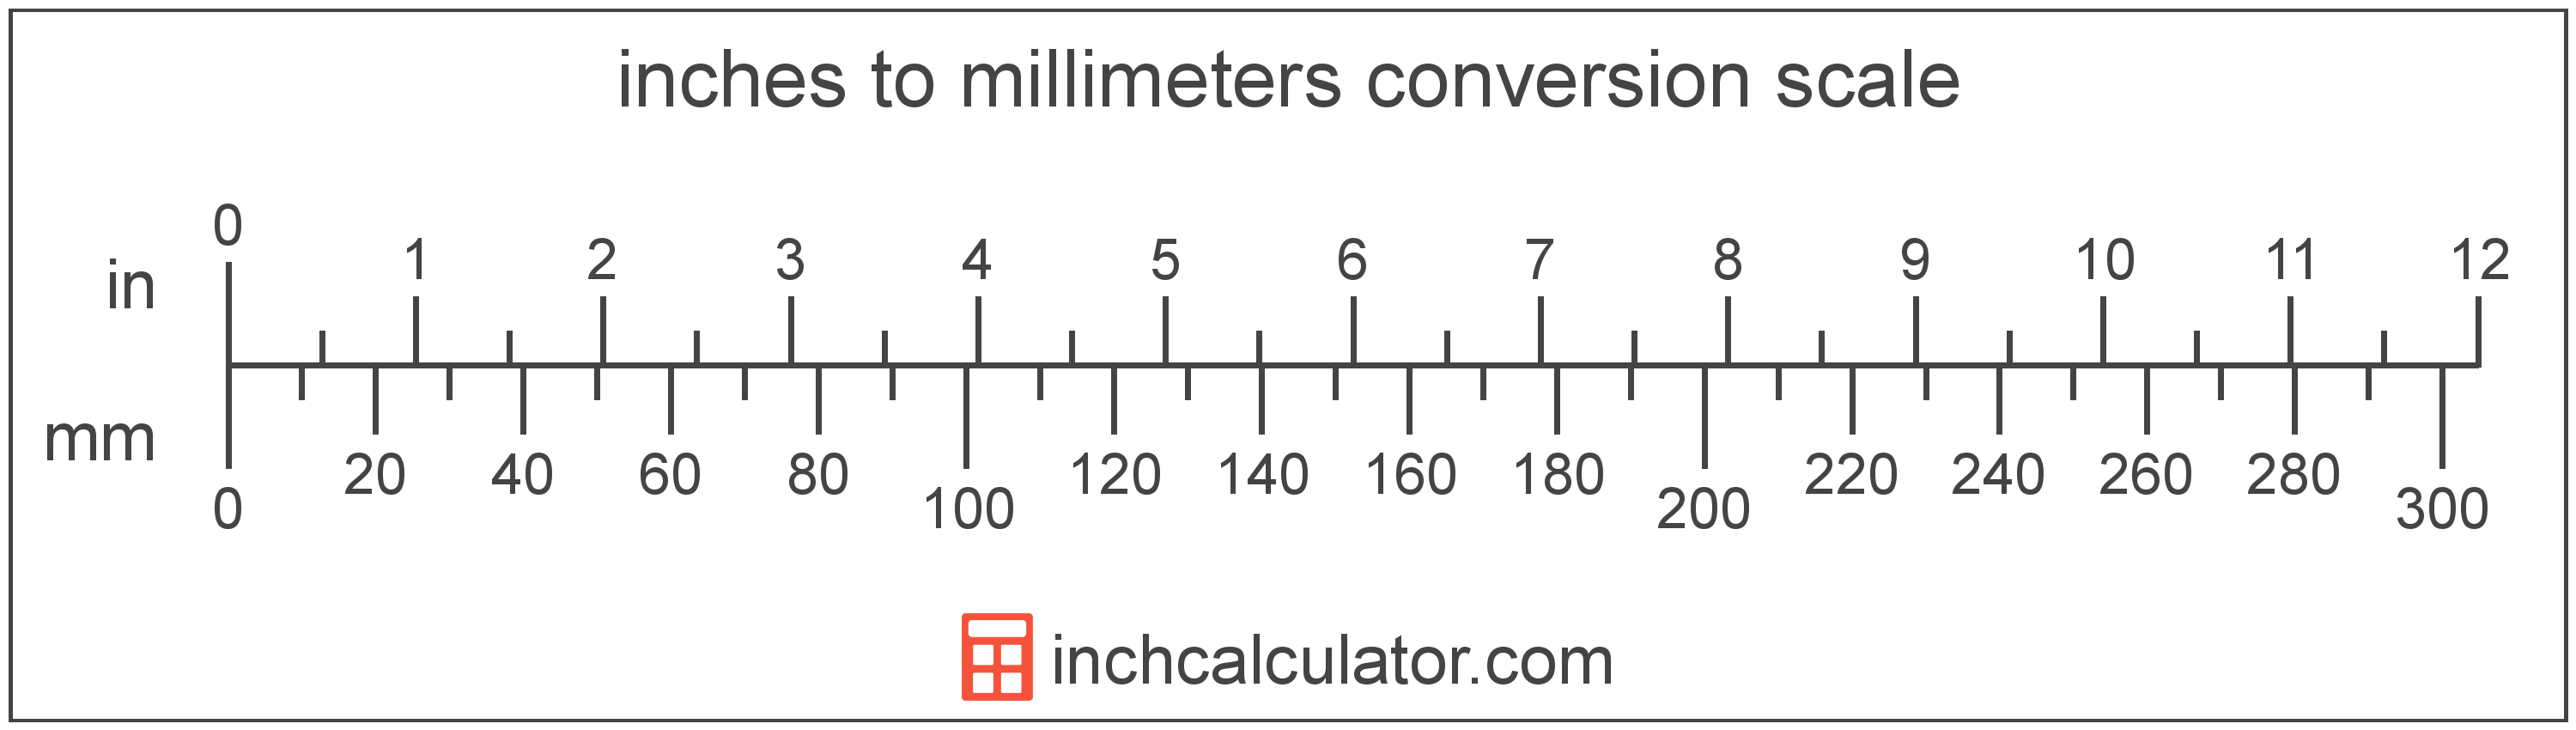 Where can you find a table to convert inches to centimeters?